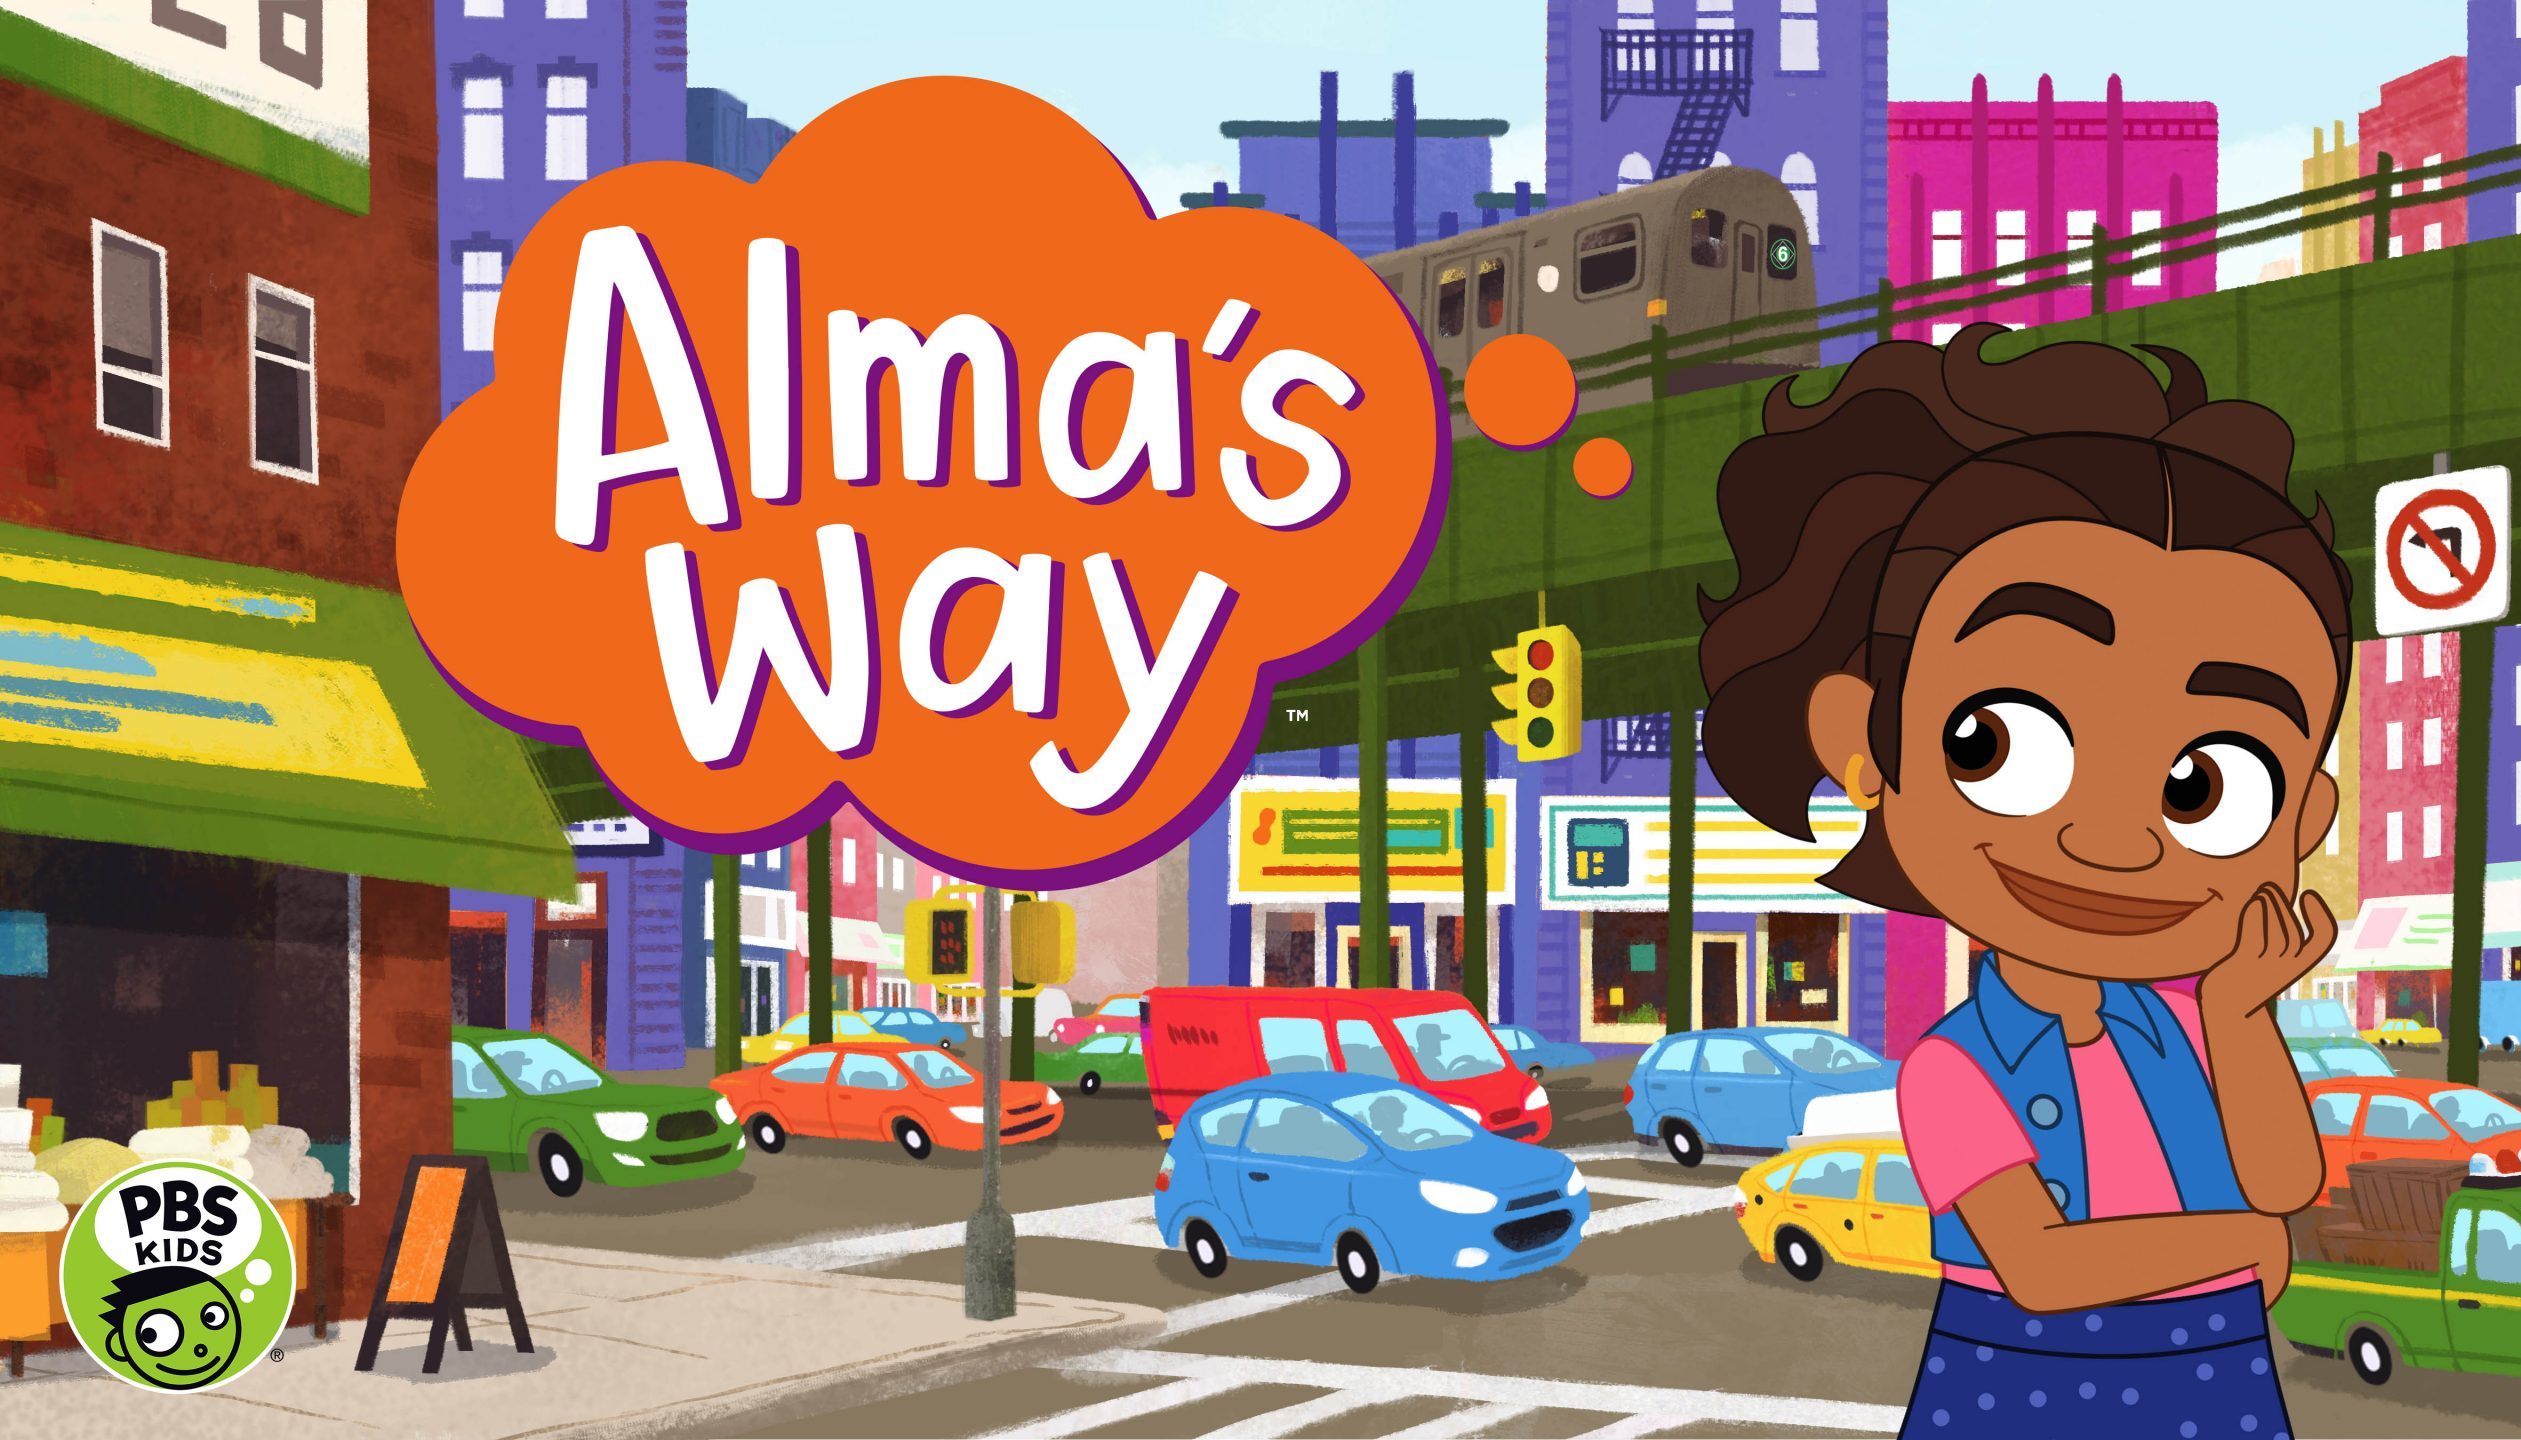 Pbs Kids And Frp Announce Alma S Way Premiering In Fall 21 Fred Rogers Productions